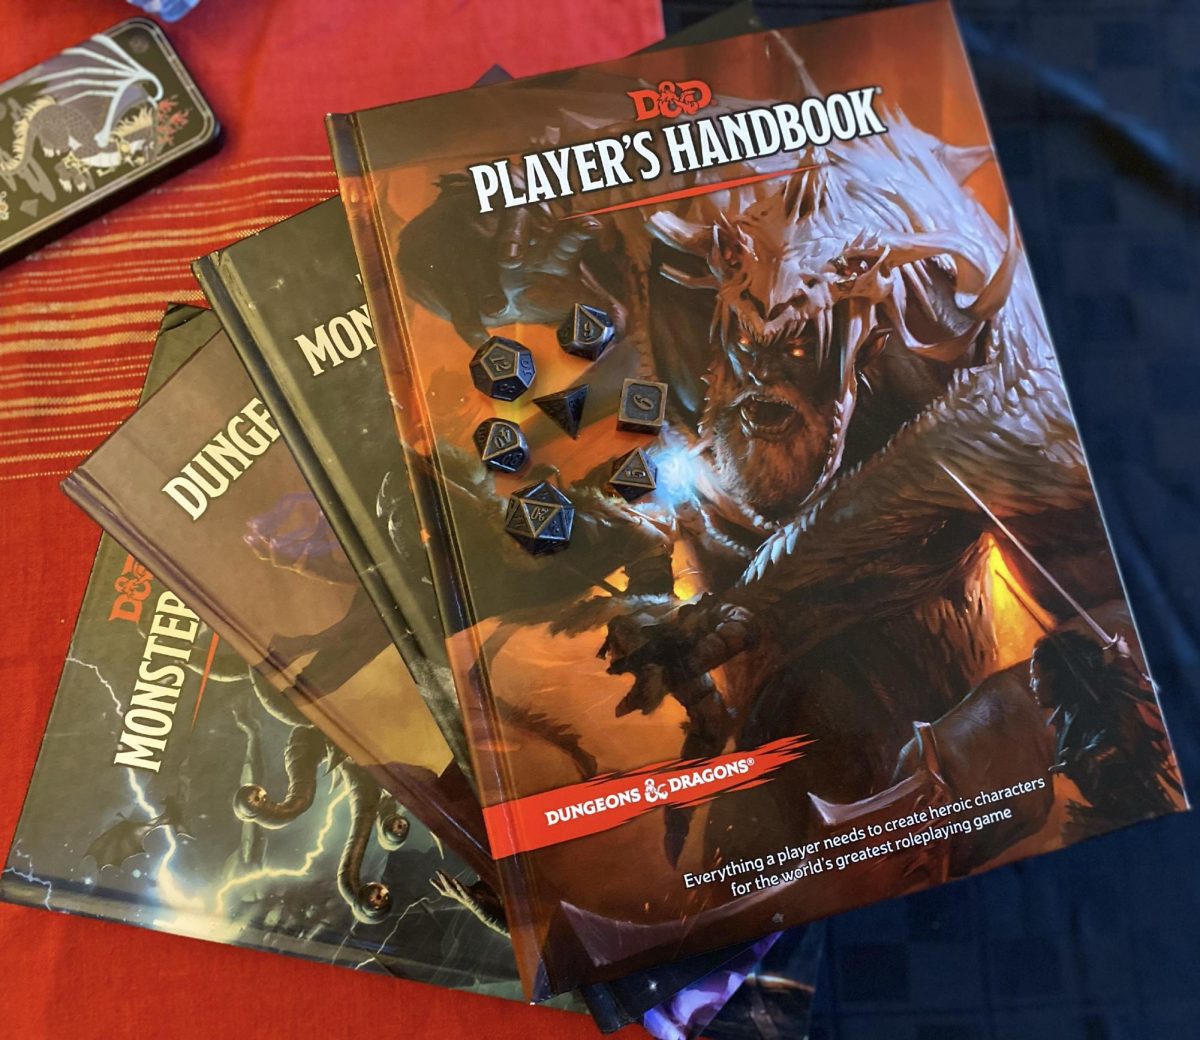 Dungeons and Dragons is a game combining story-telling and mechanics. Several official rule books have been published by the company Wizards of the Coasts that now owns the franchise.